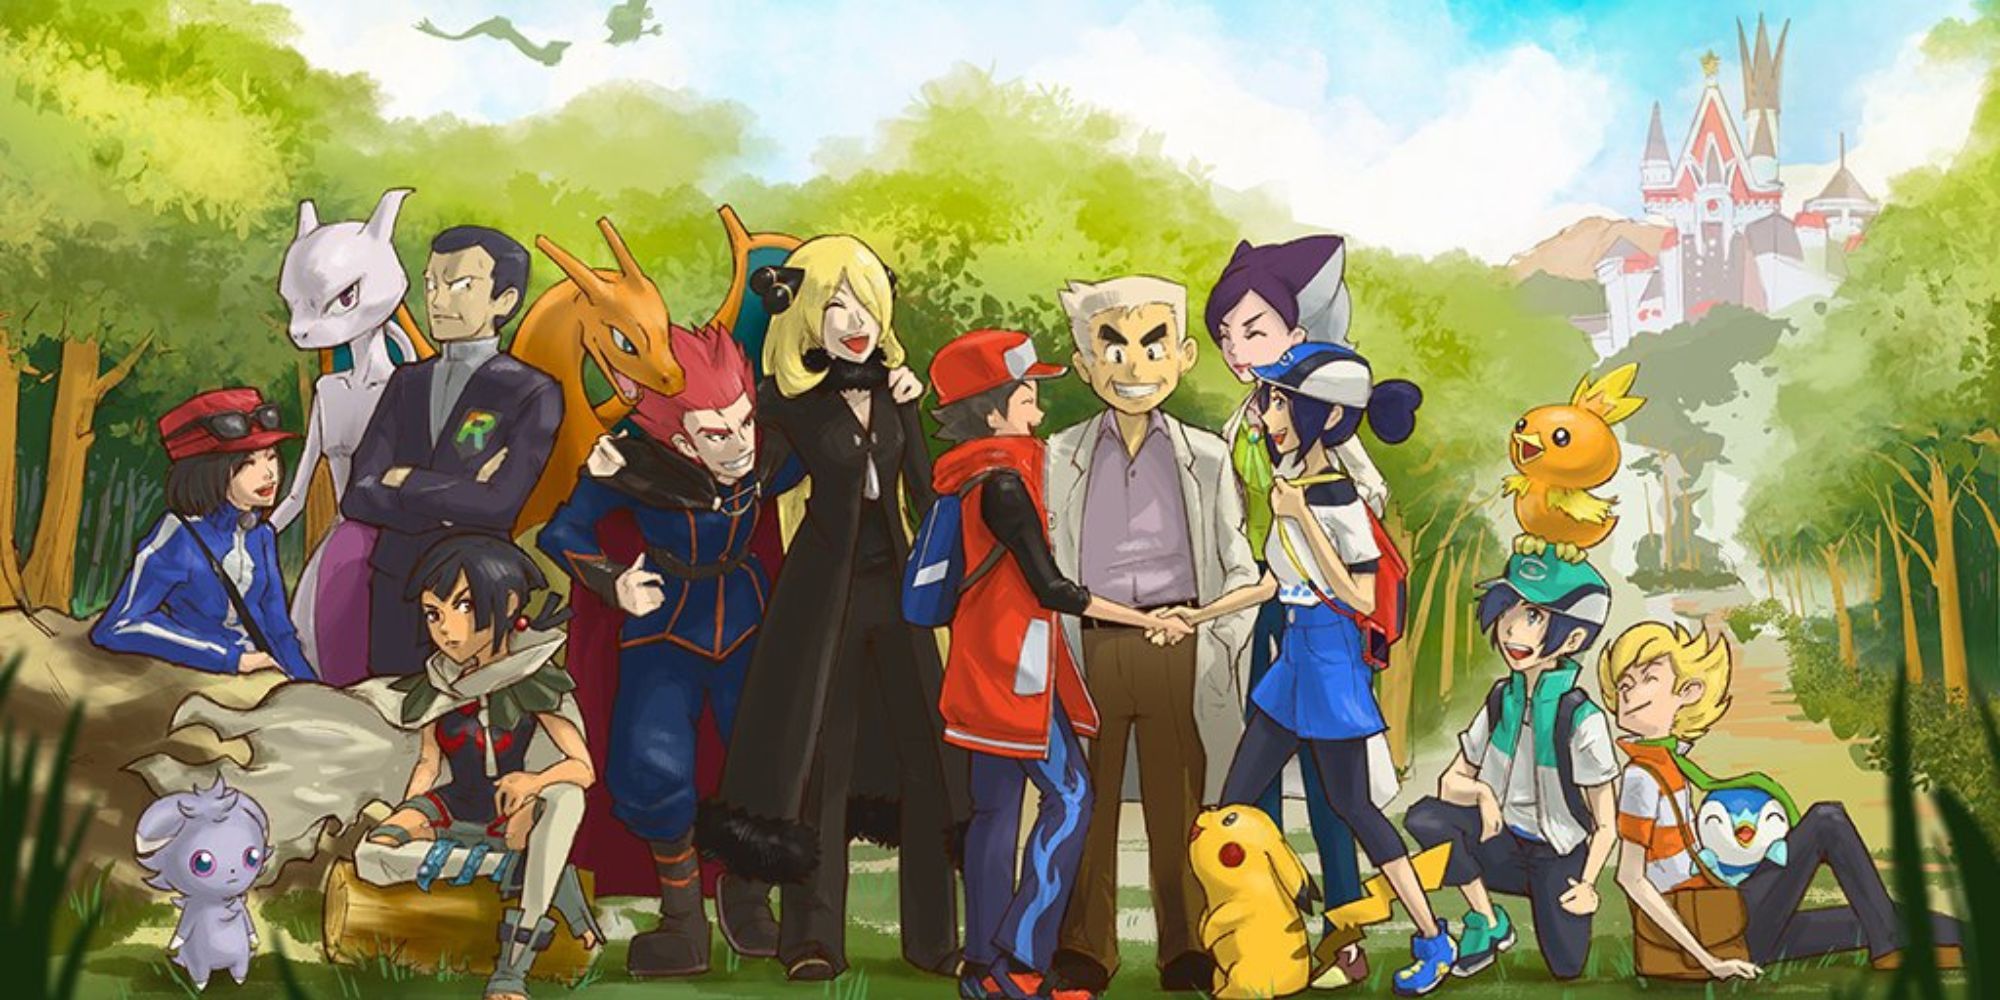 A group of Pokemon and trainers gather in a wooded area